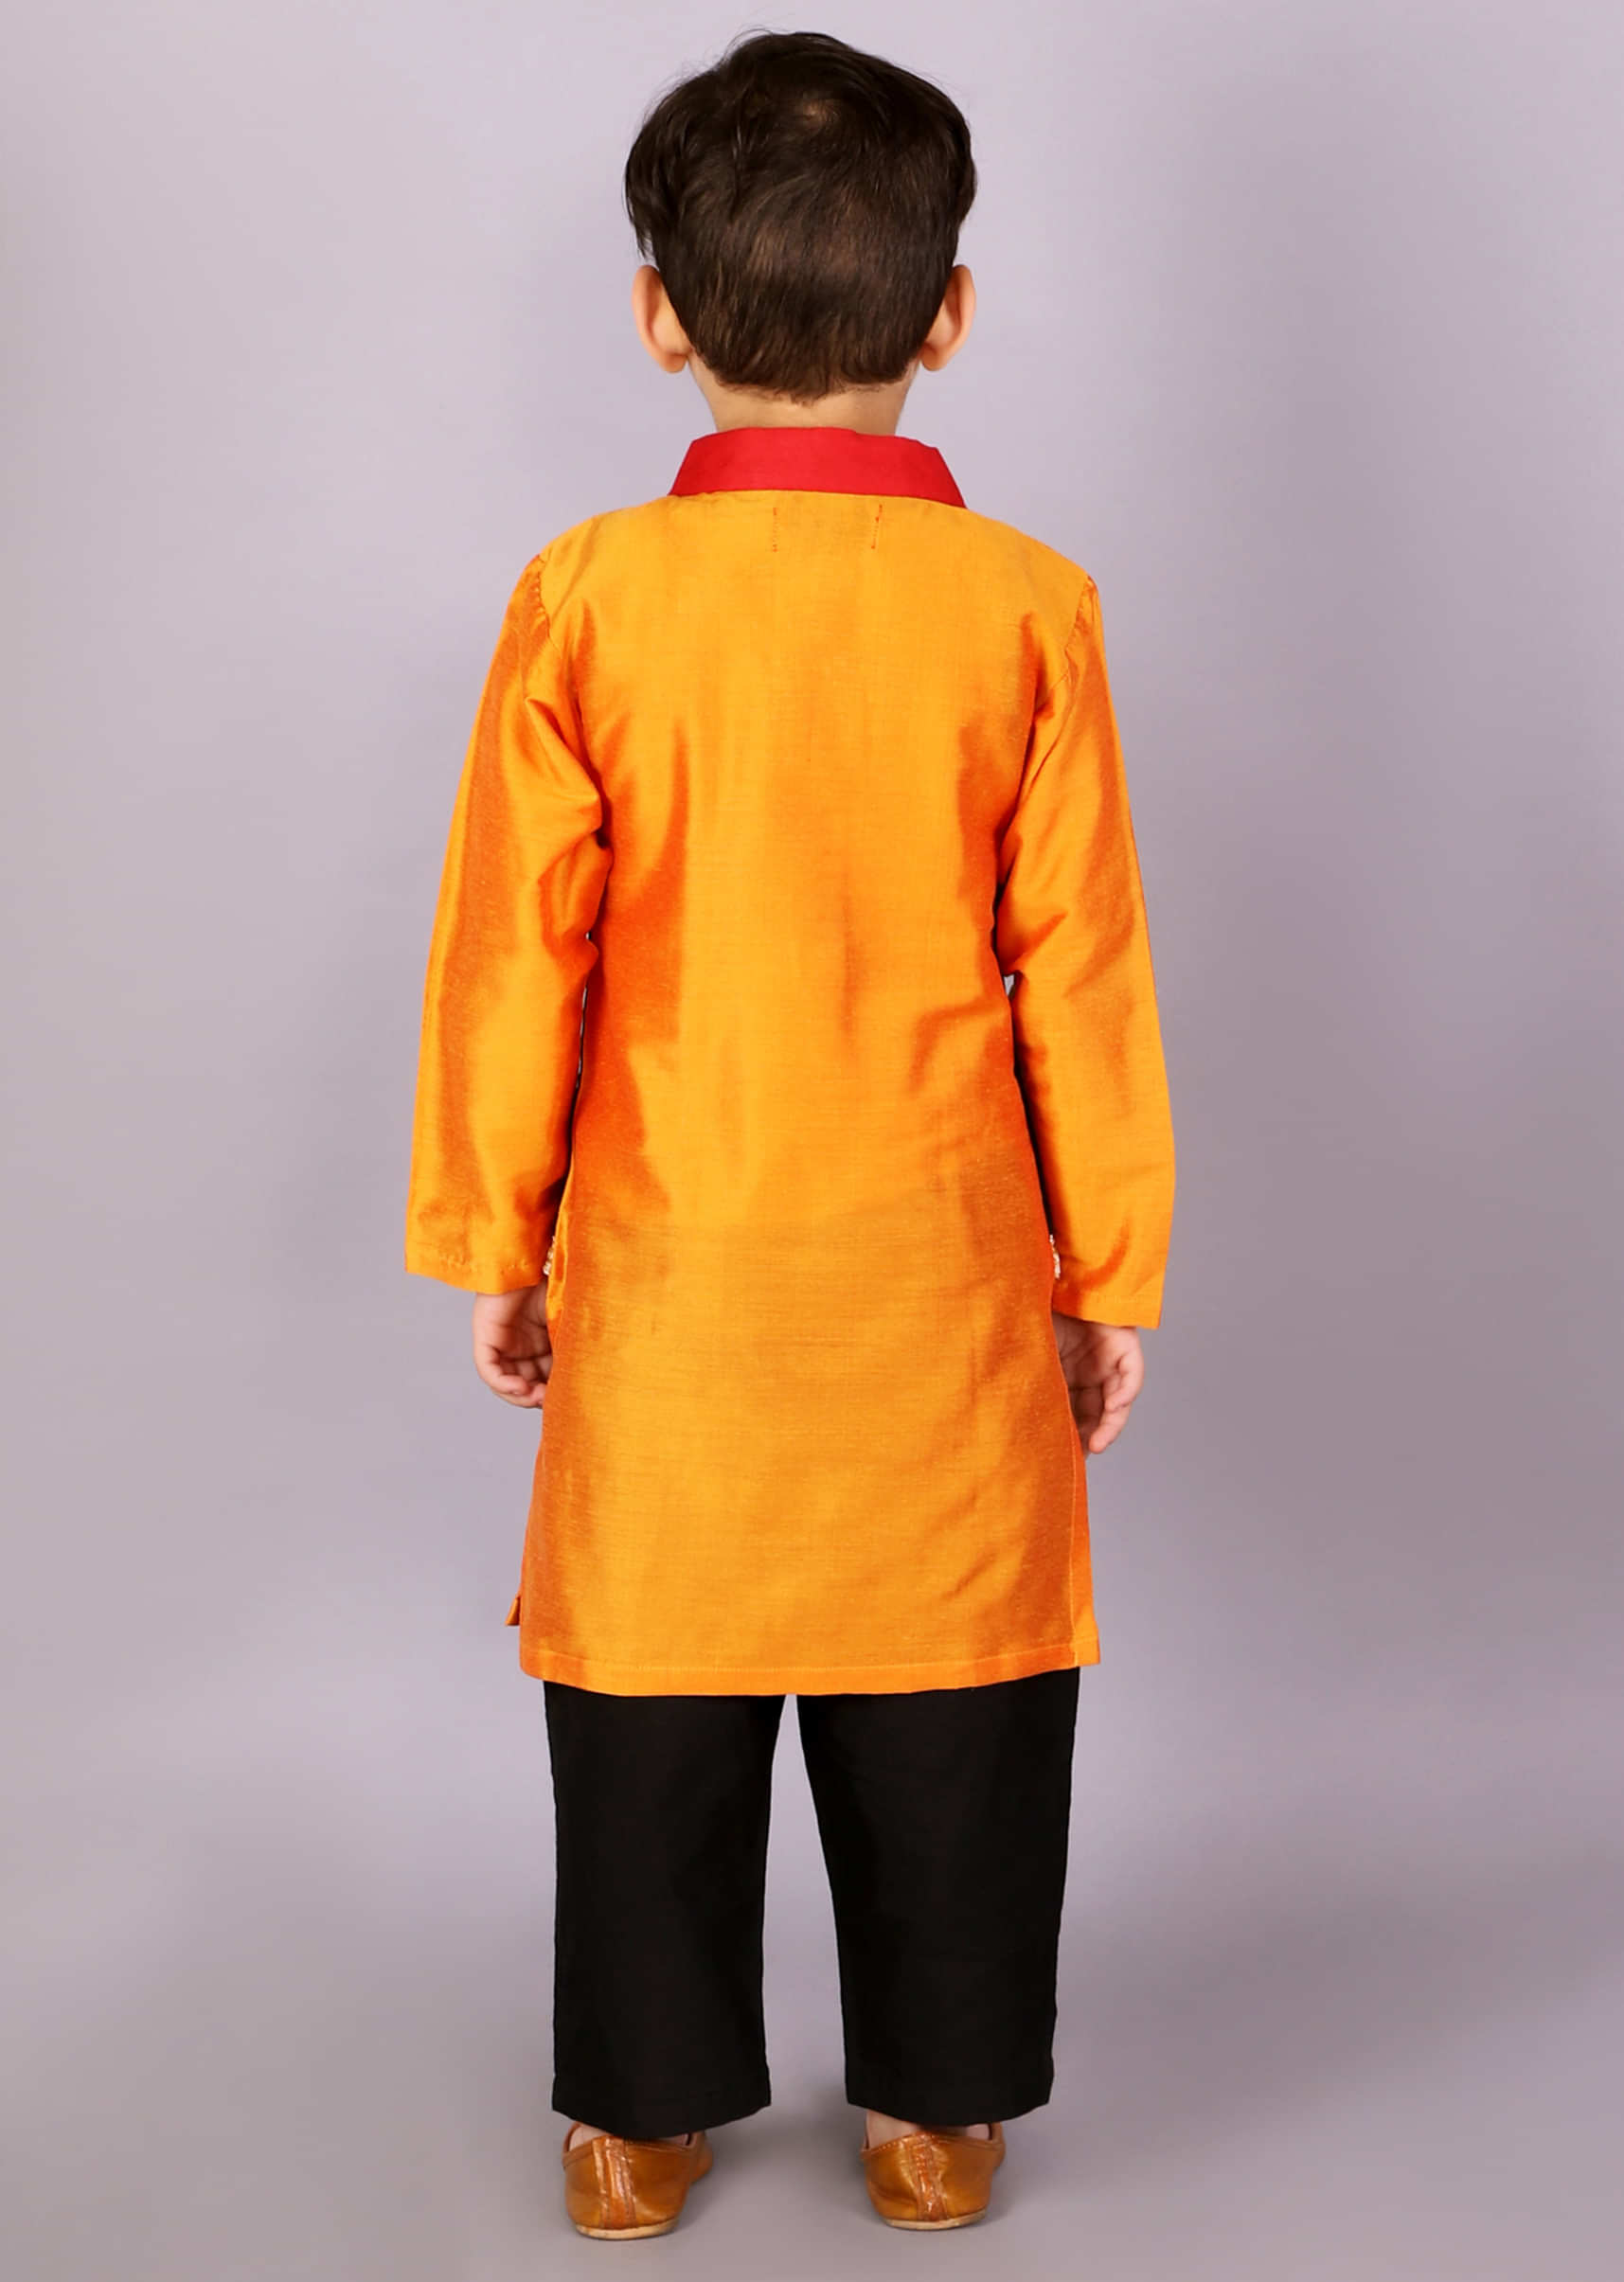 Kalki Boys Multi Colored Kurta Set With An Attached Black Jacket Detailed In Lace